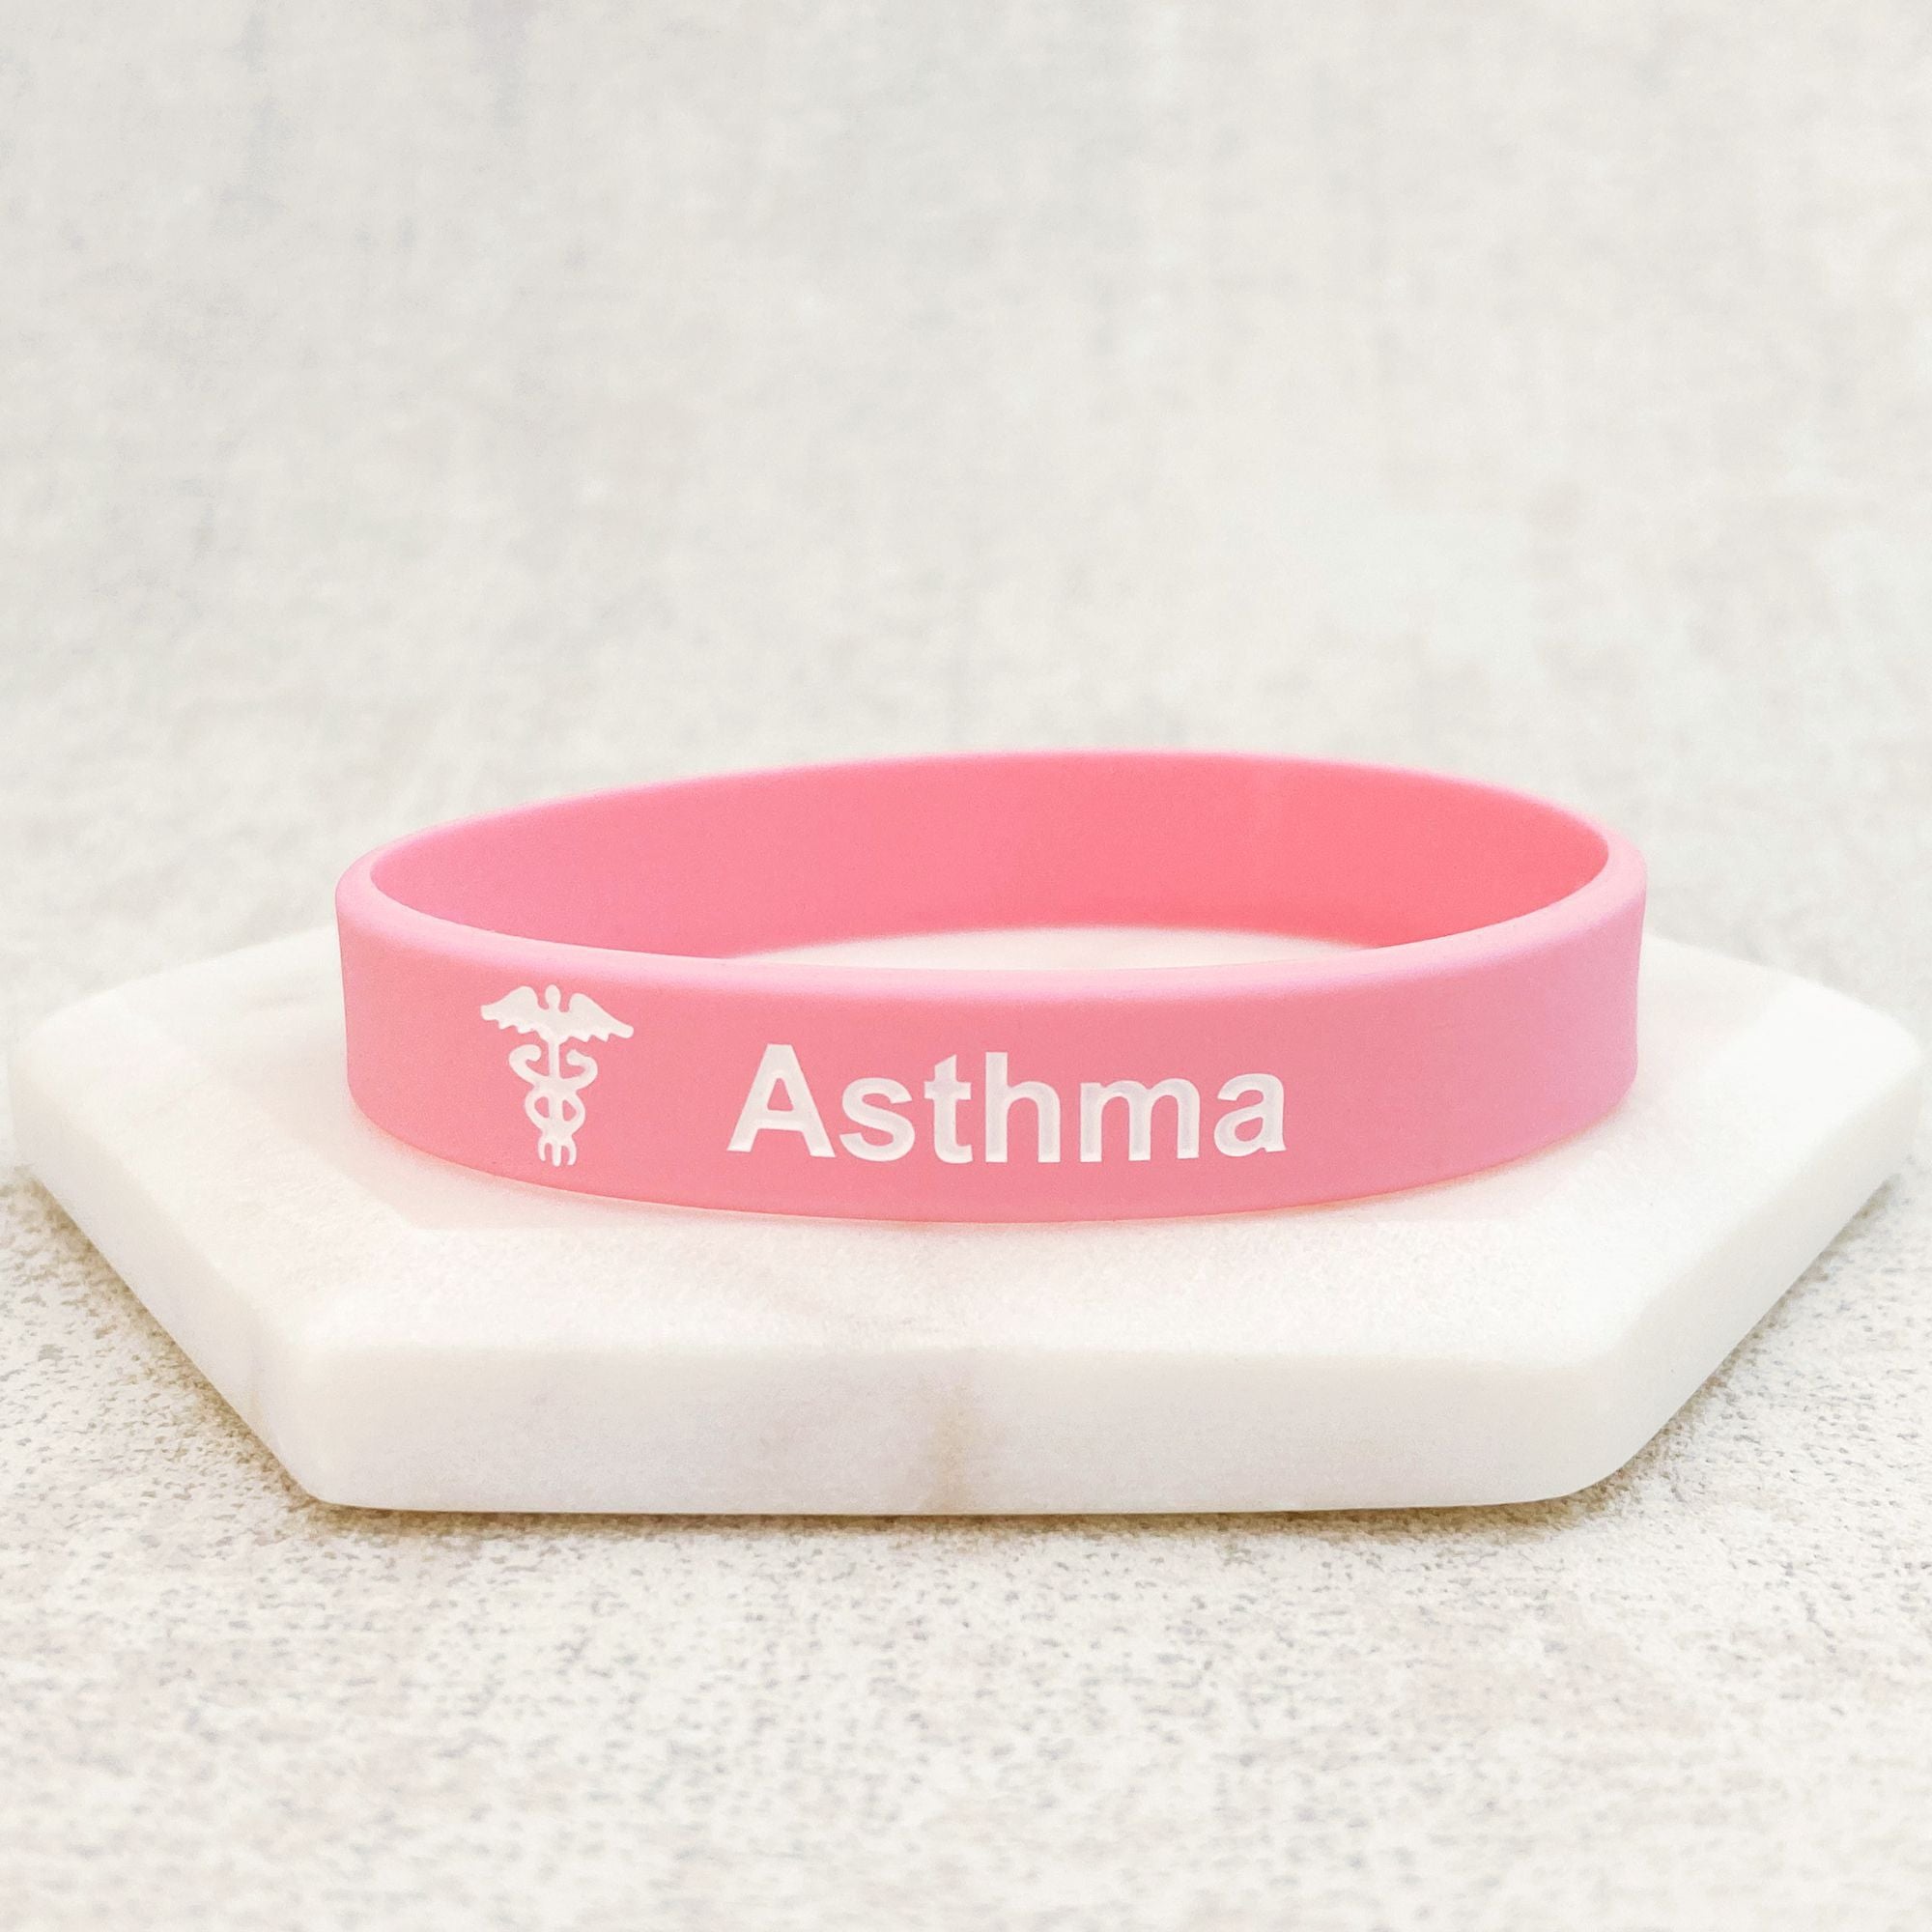 Buy Lyndong 4 Pack Asthma Silicone Medical Alert Emergency Bracelet  Wristbands, Silicone at Amazon.in